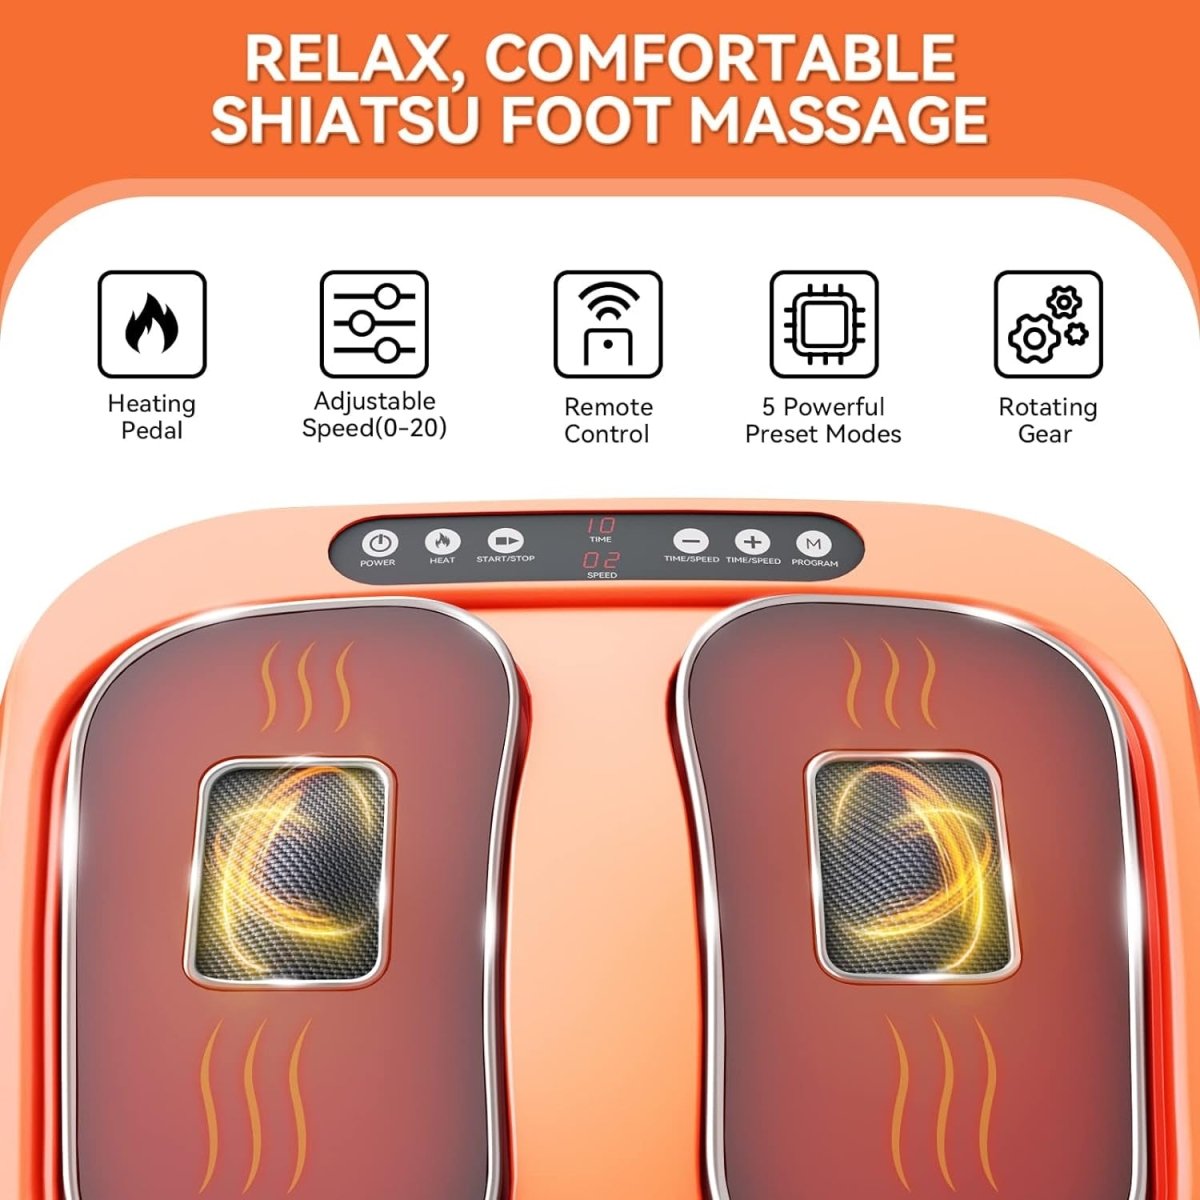 Foot Massager with Heat - Shiny Nails